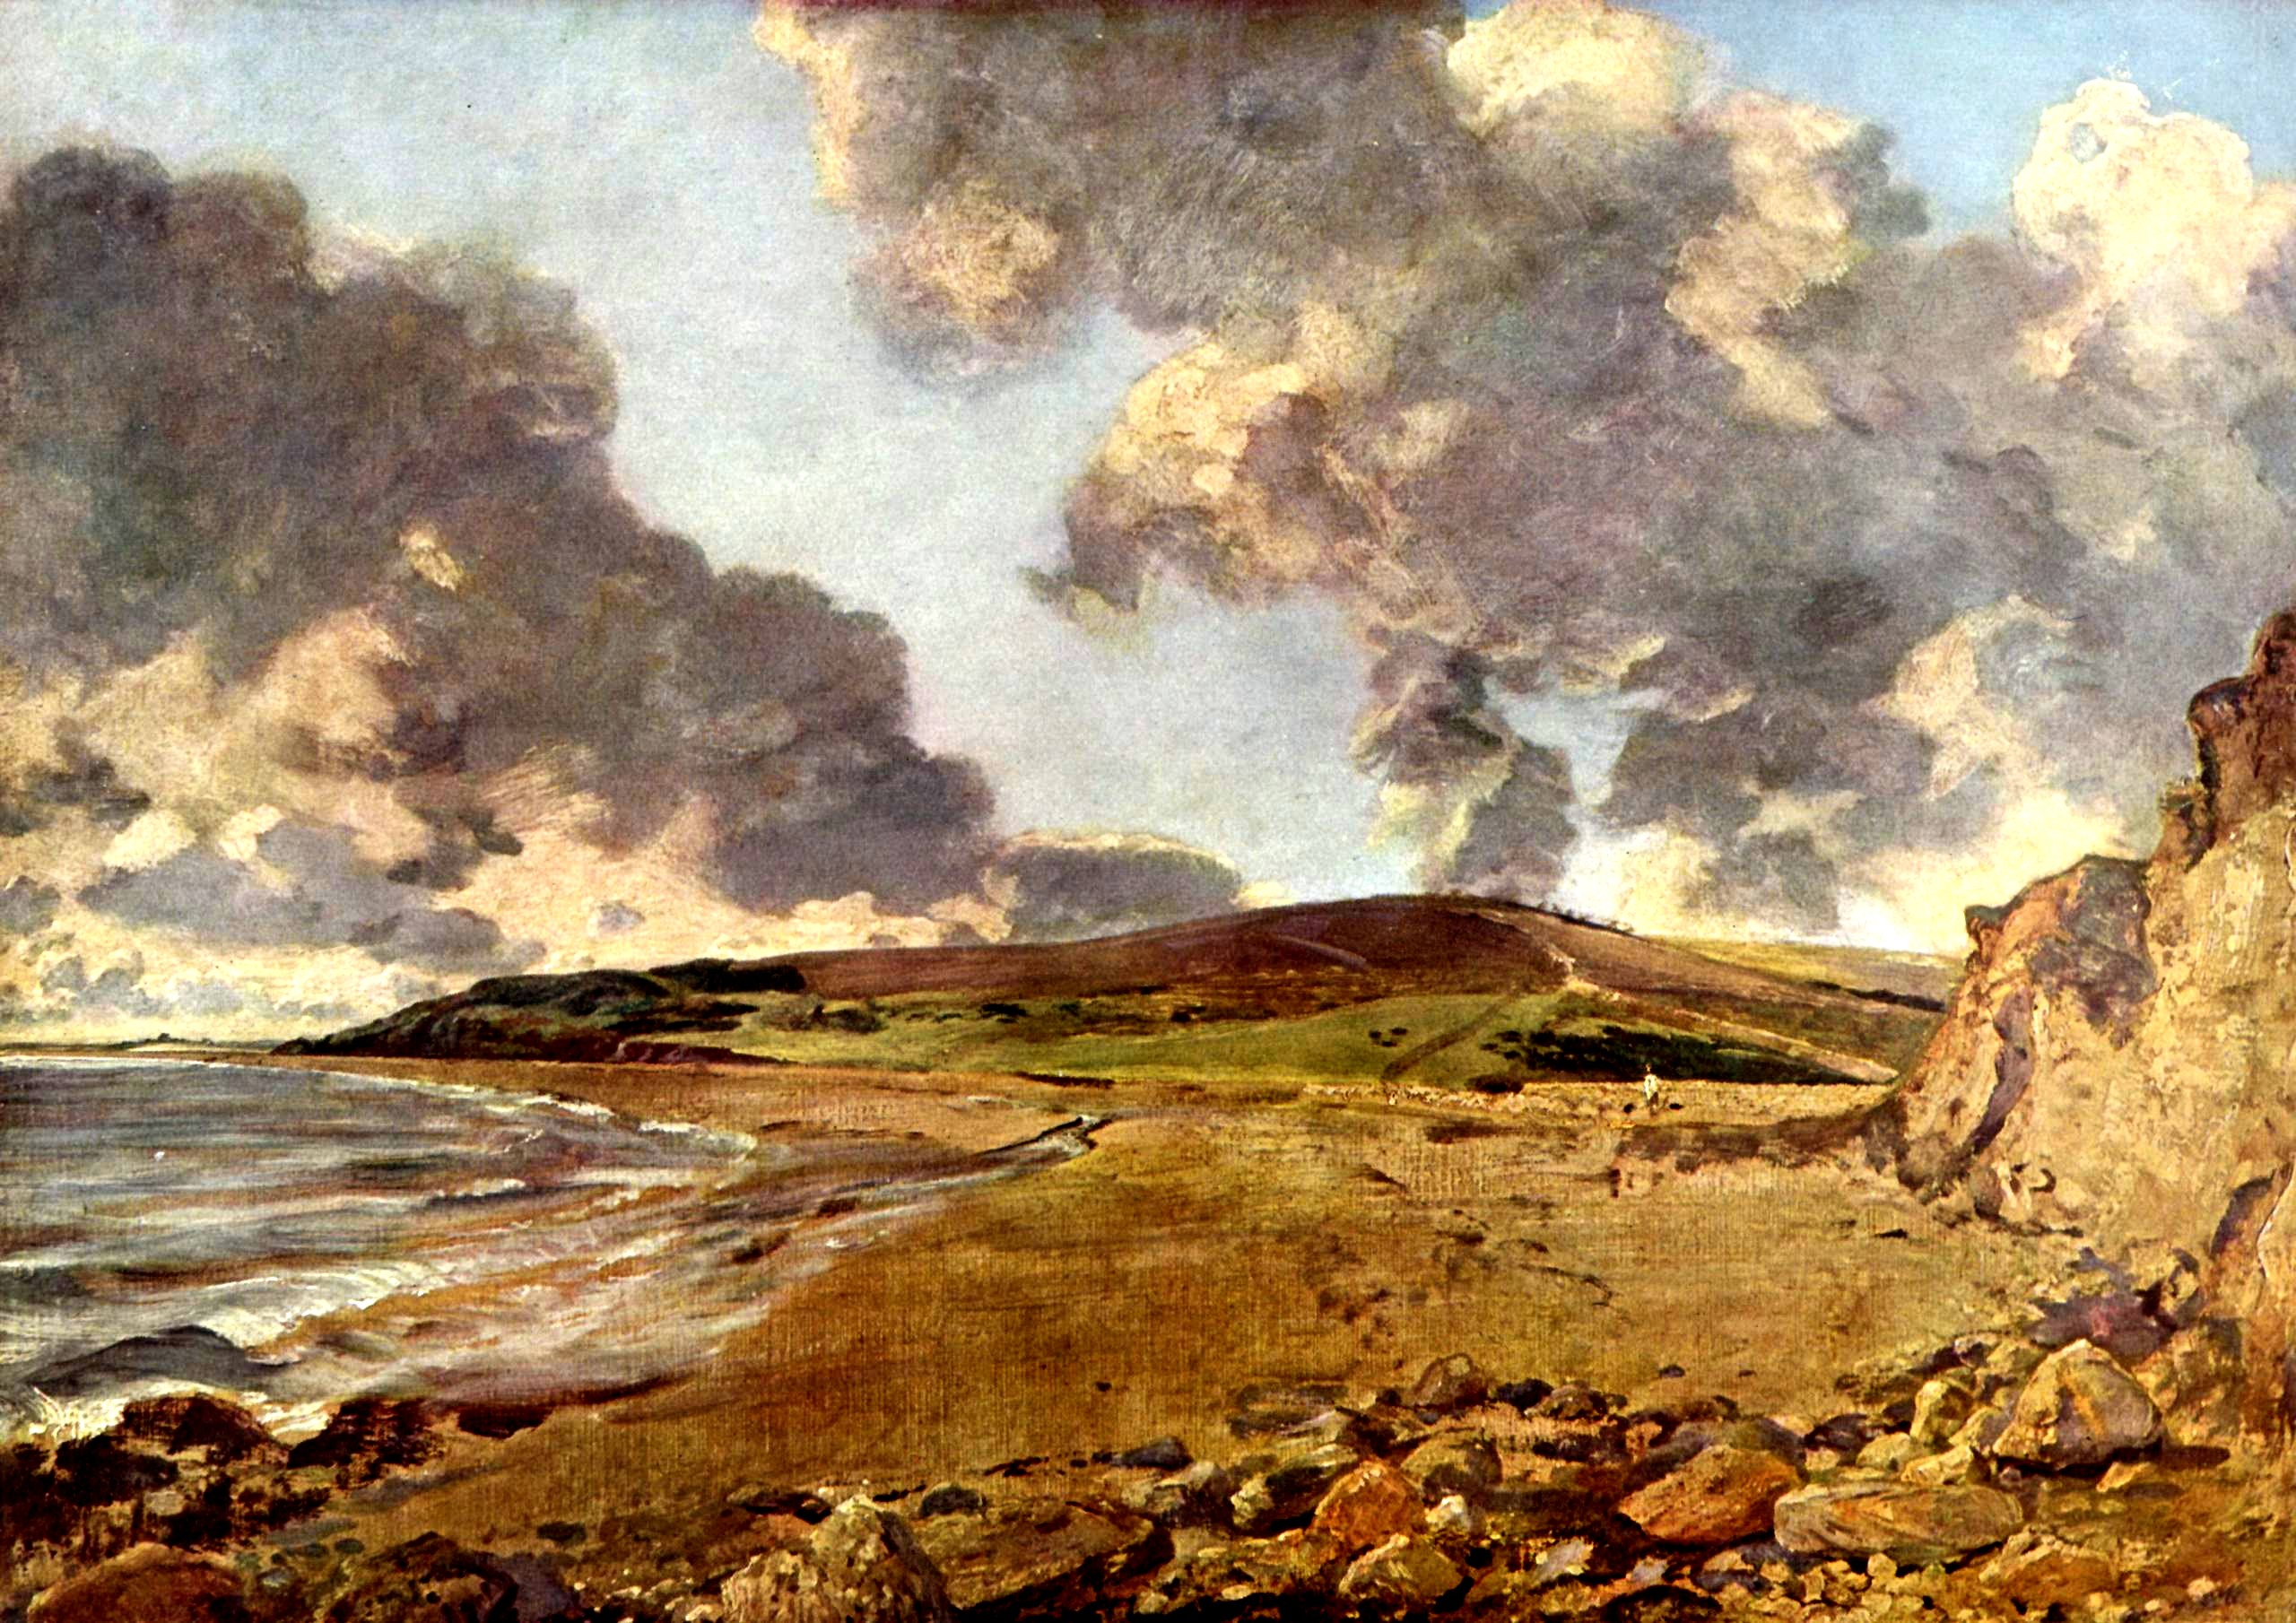 A painting of a rocky shore